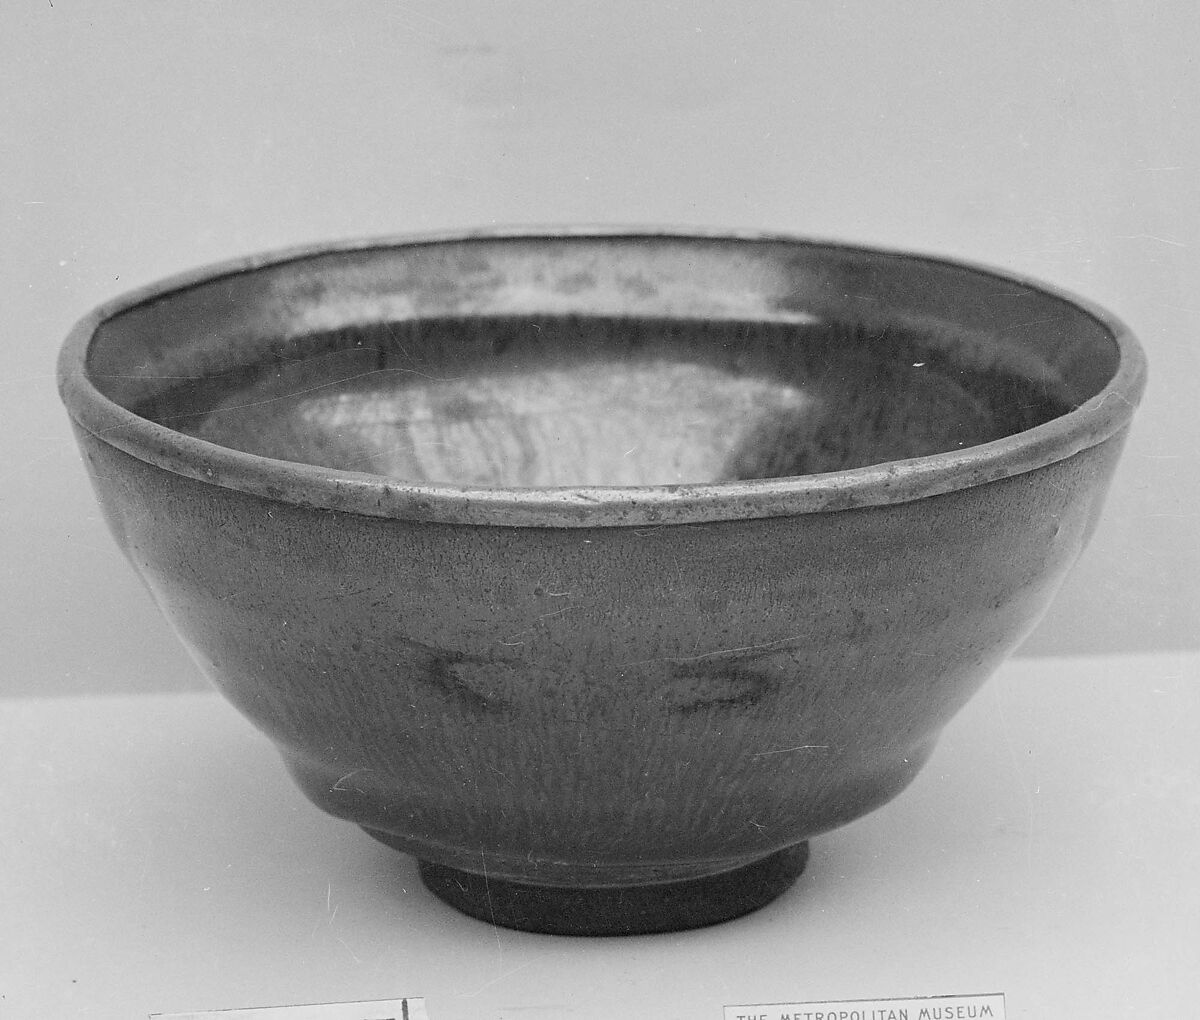 Bowl, Dark brown ware with thick black glaze streaked with brown; metal rim (Jian ware), China 